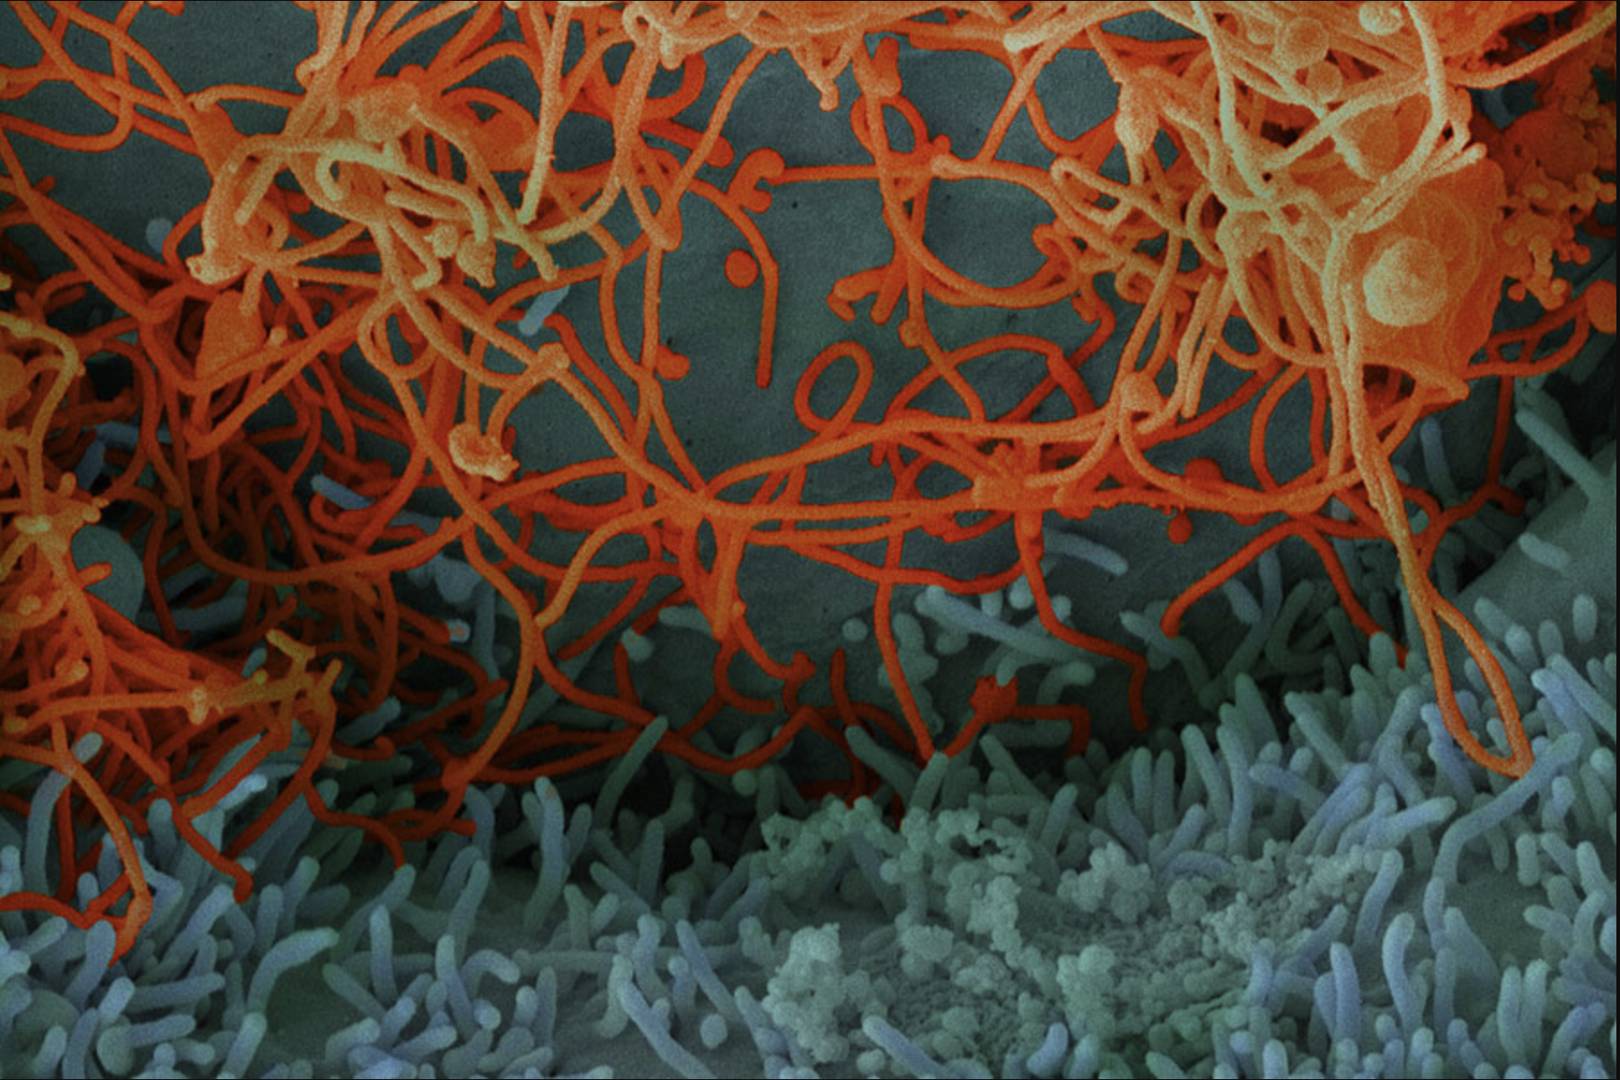 Up close the Ebola virus is finally revealing its deadly secrets | WIRED UK